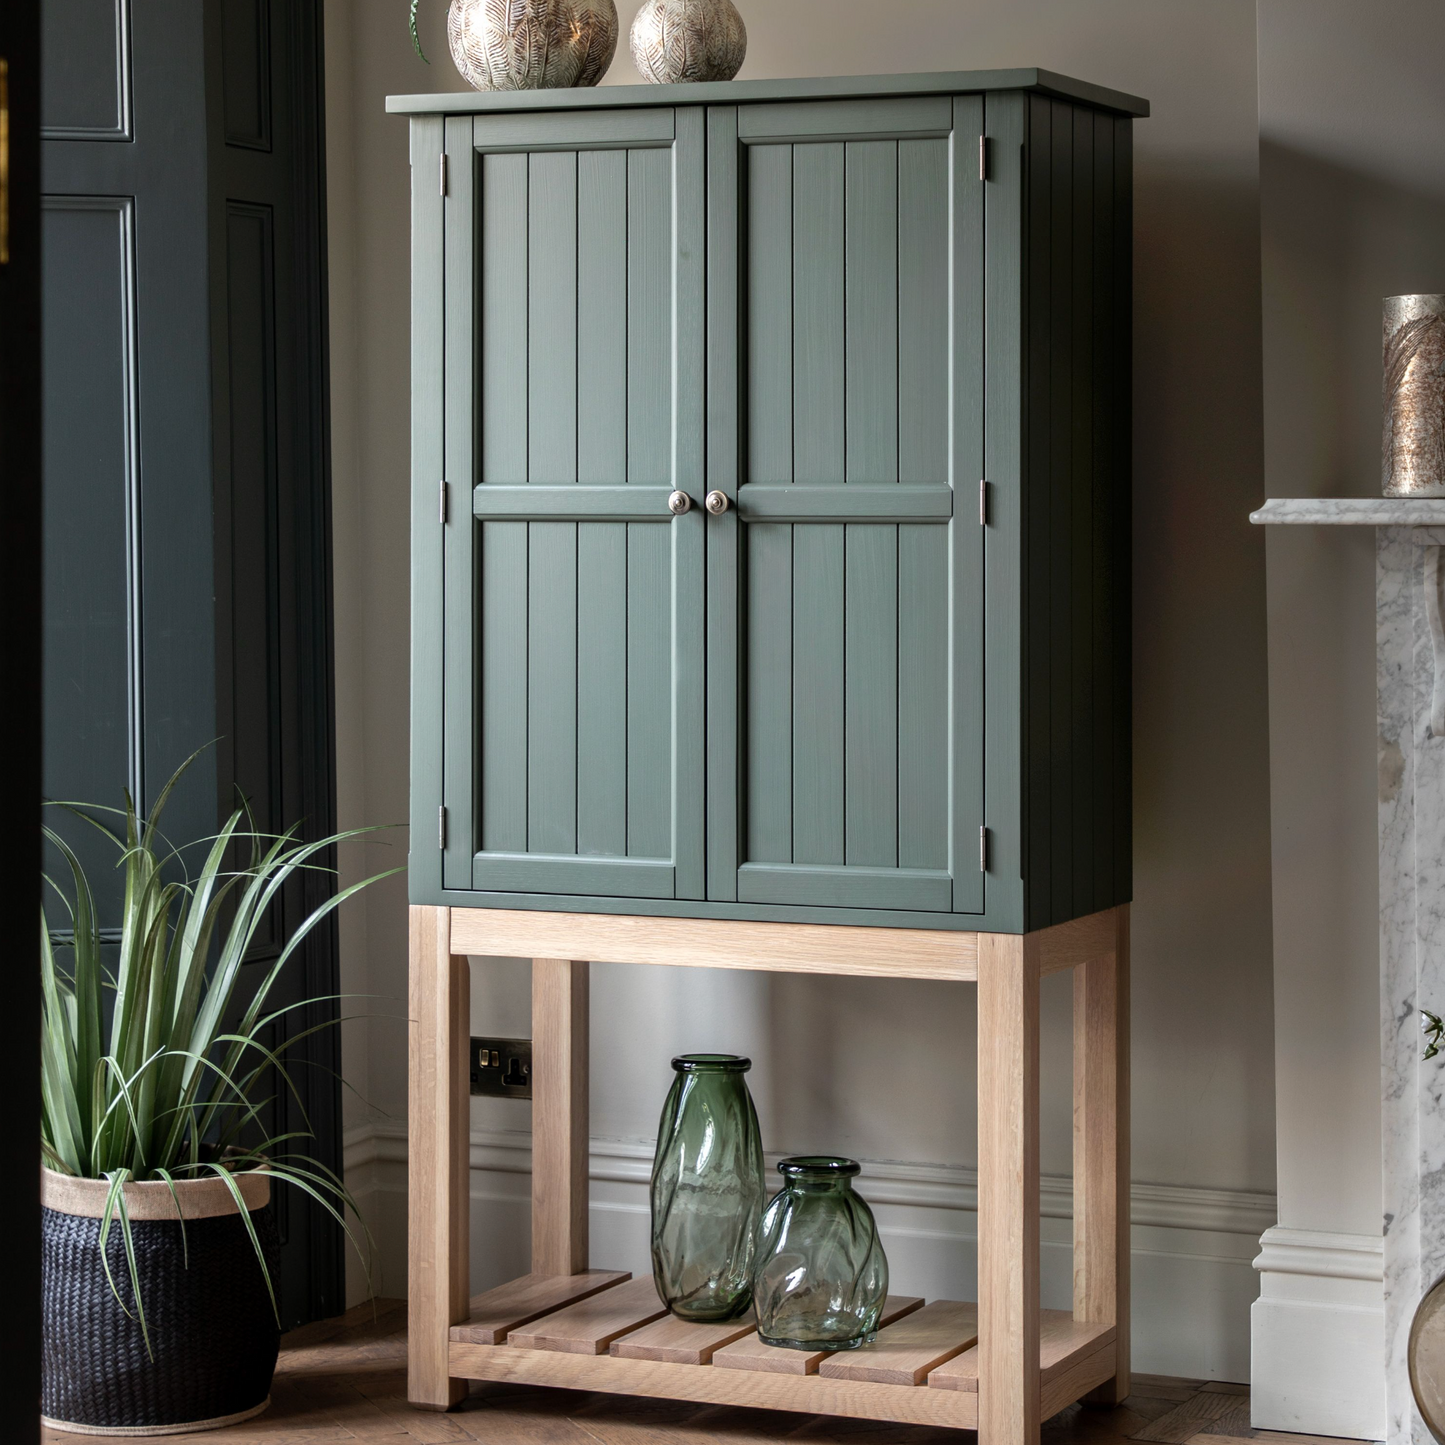 A Buckland 2 Door Storage Cupboard in Moss (w)900x(d)450x(h)1700mm from Kikiathome.co.uk, perfect for interior decor and home furniture